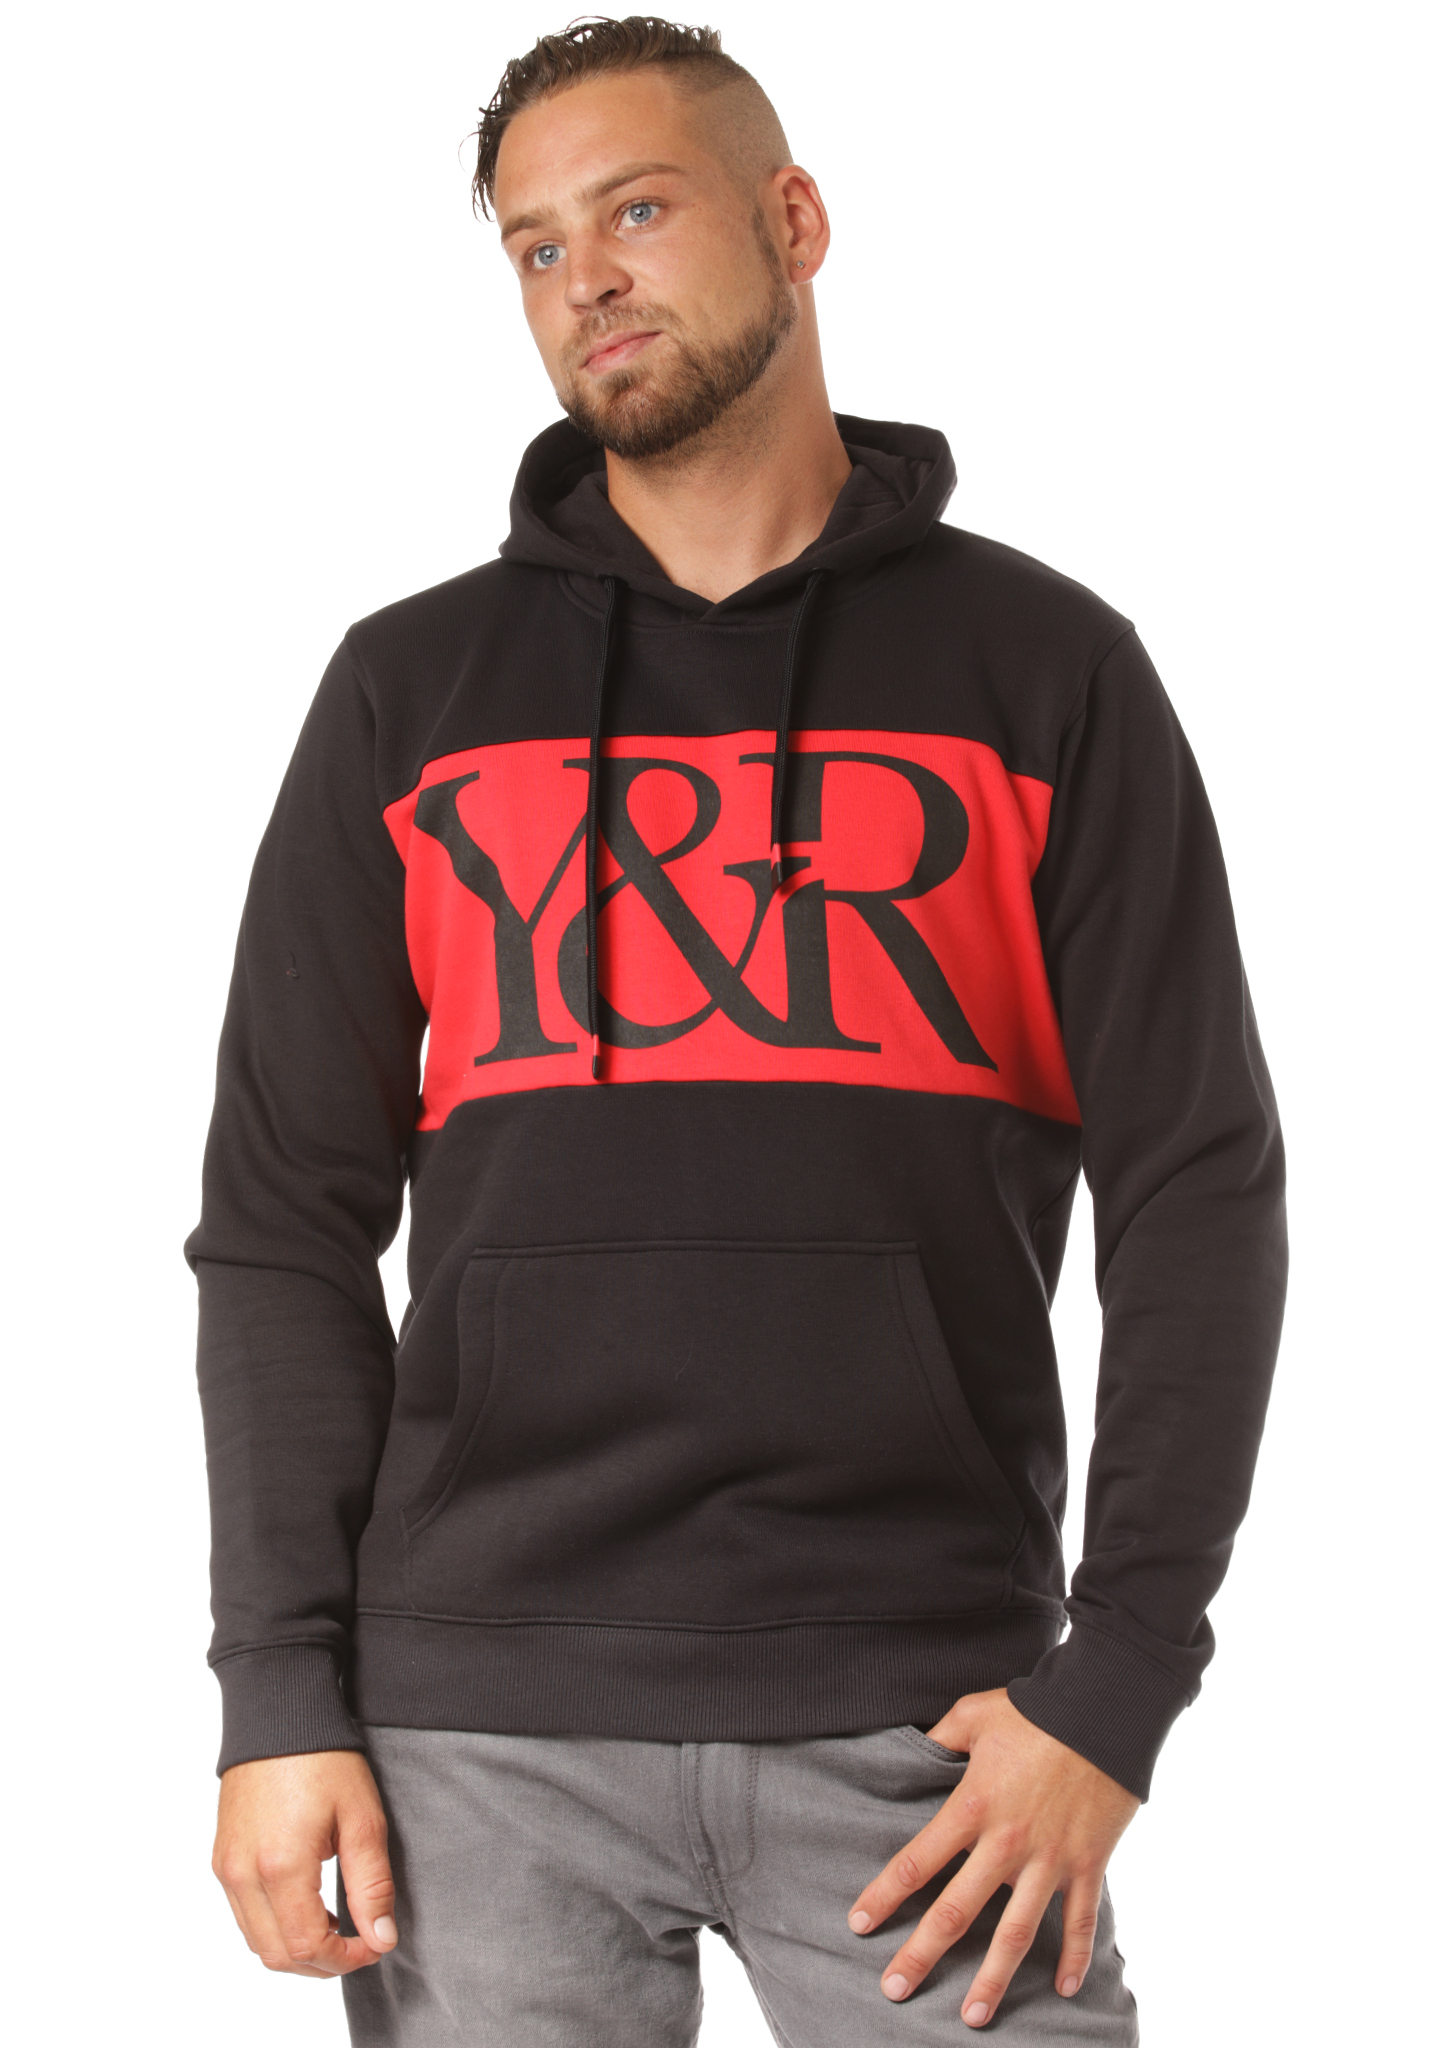 Young and Reckless Hybrid Hoodie schwarz/mohnrot M